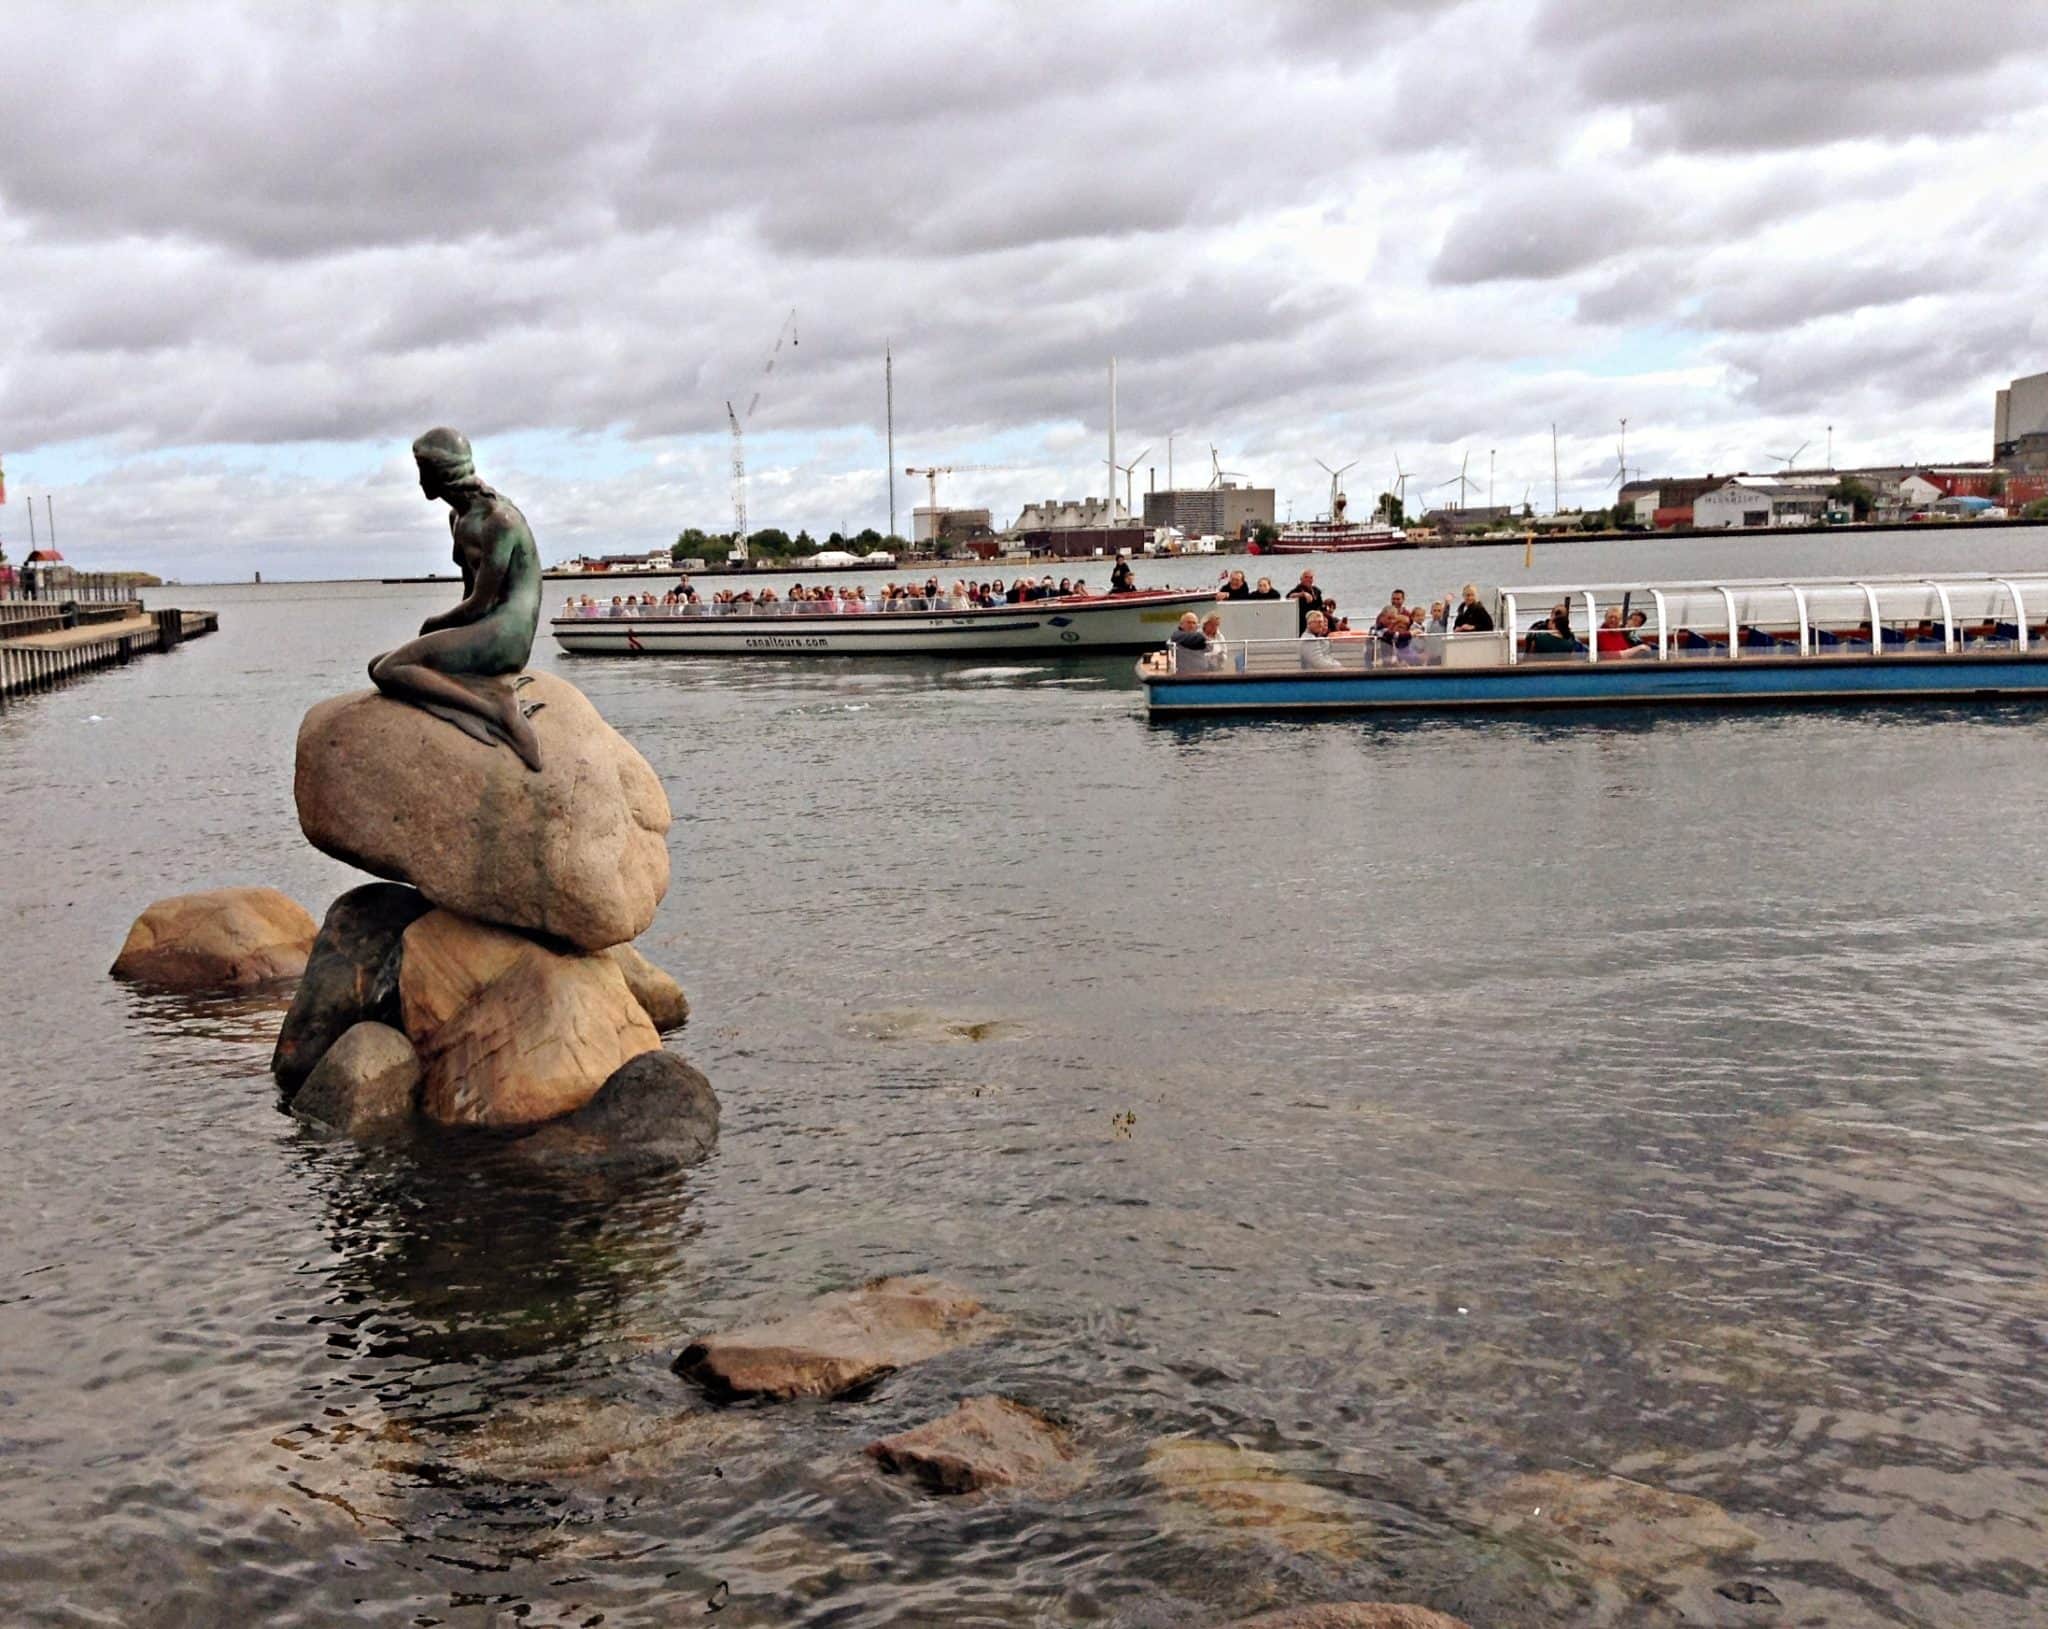 The Little Mermaid Statue in Copenhagen: What’s the Story?